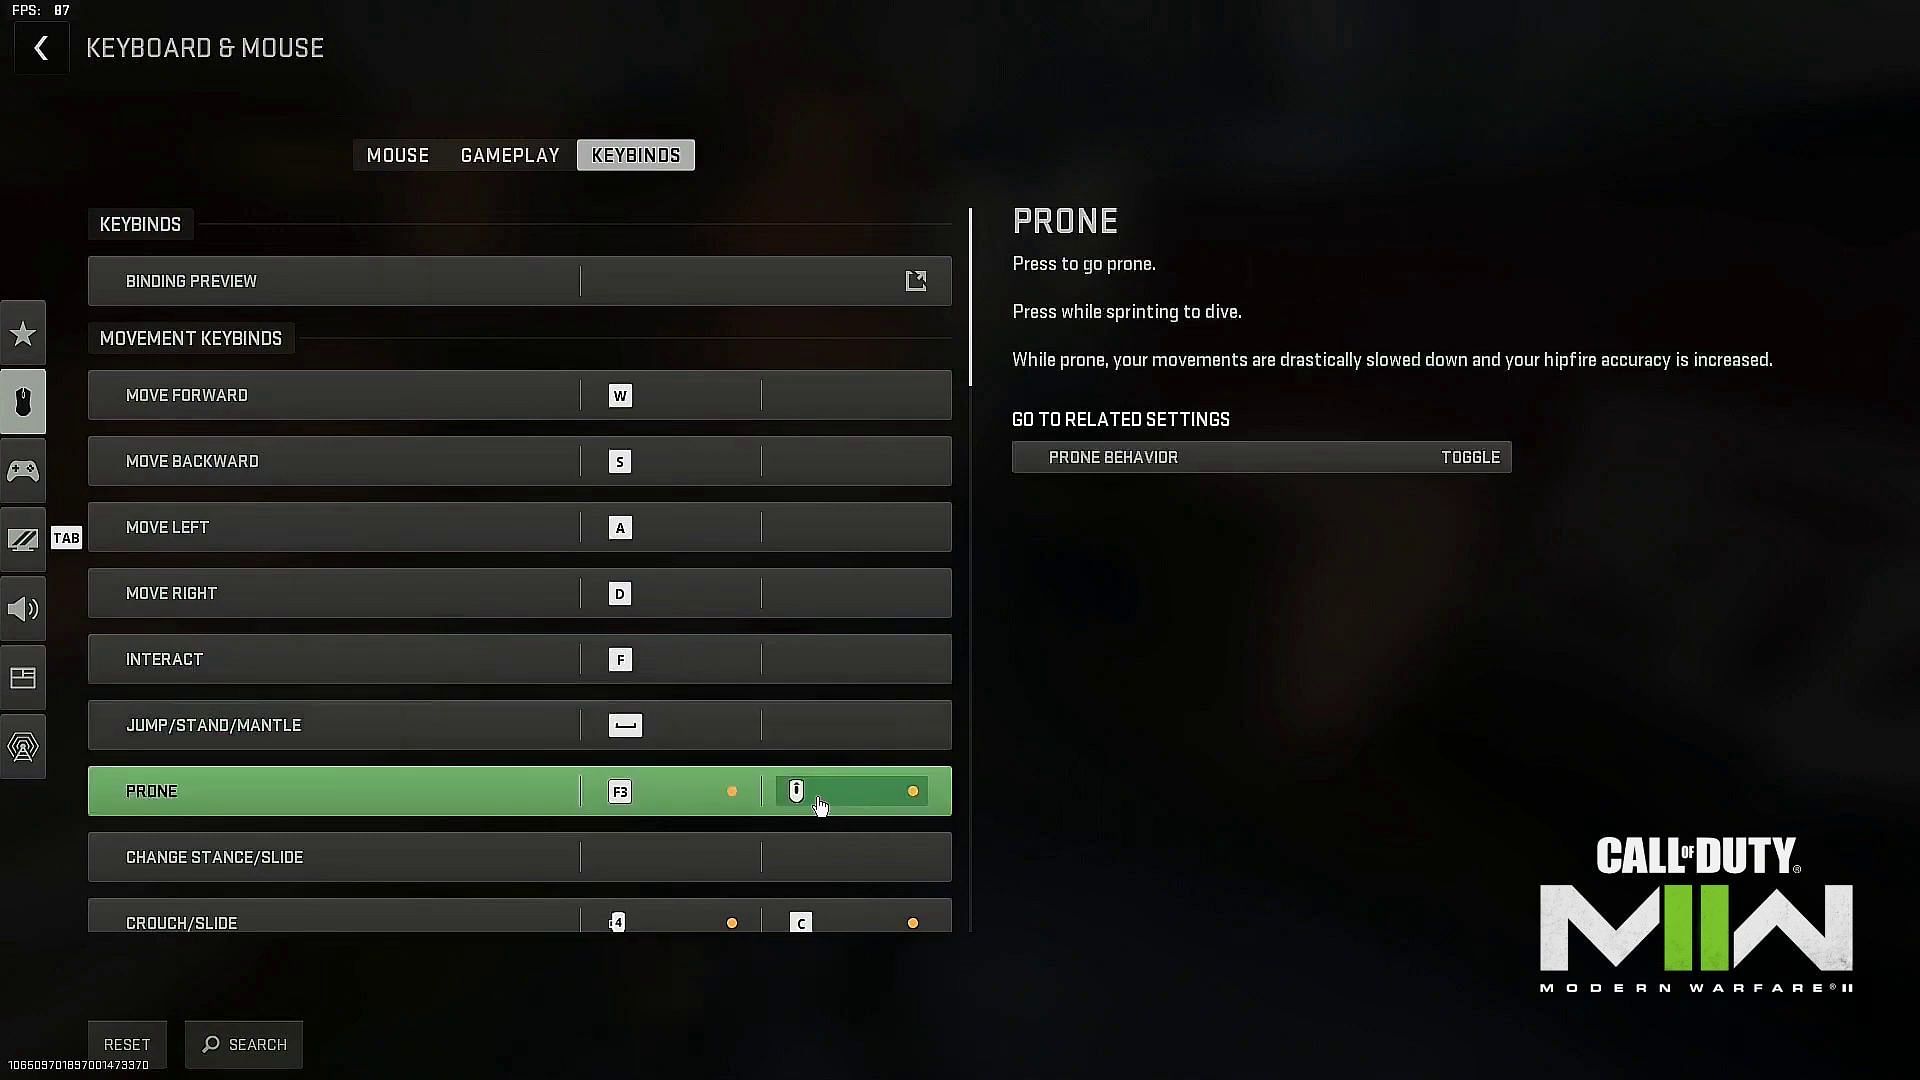 Change your Prone key bind to scroll (Image via Activision)